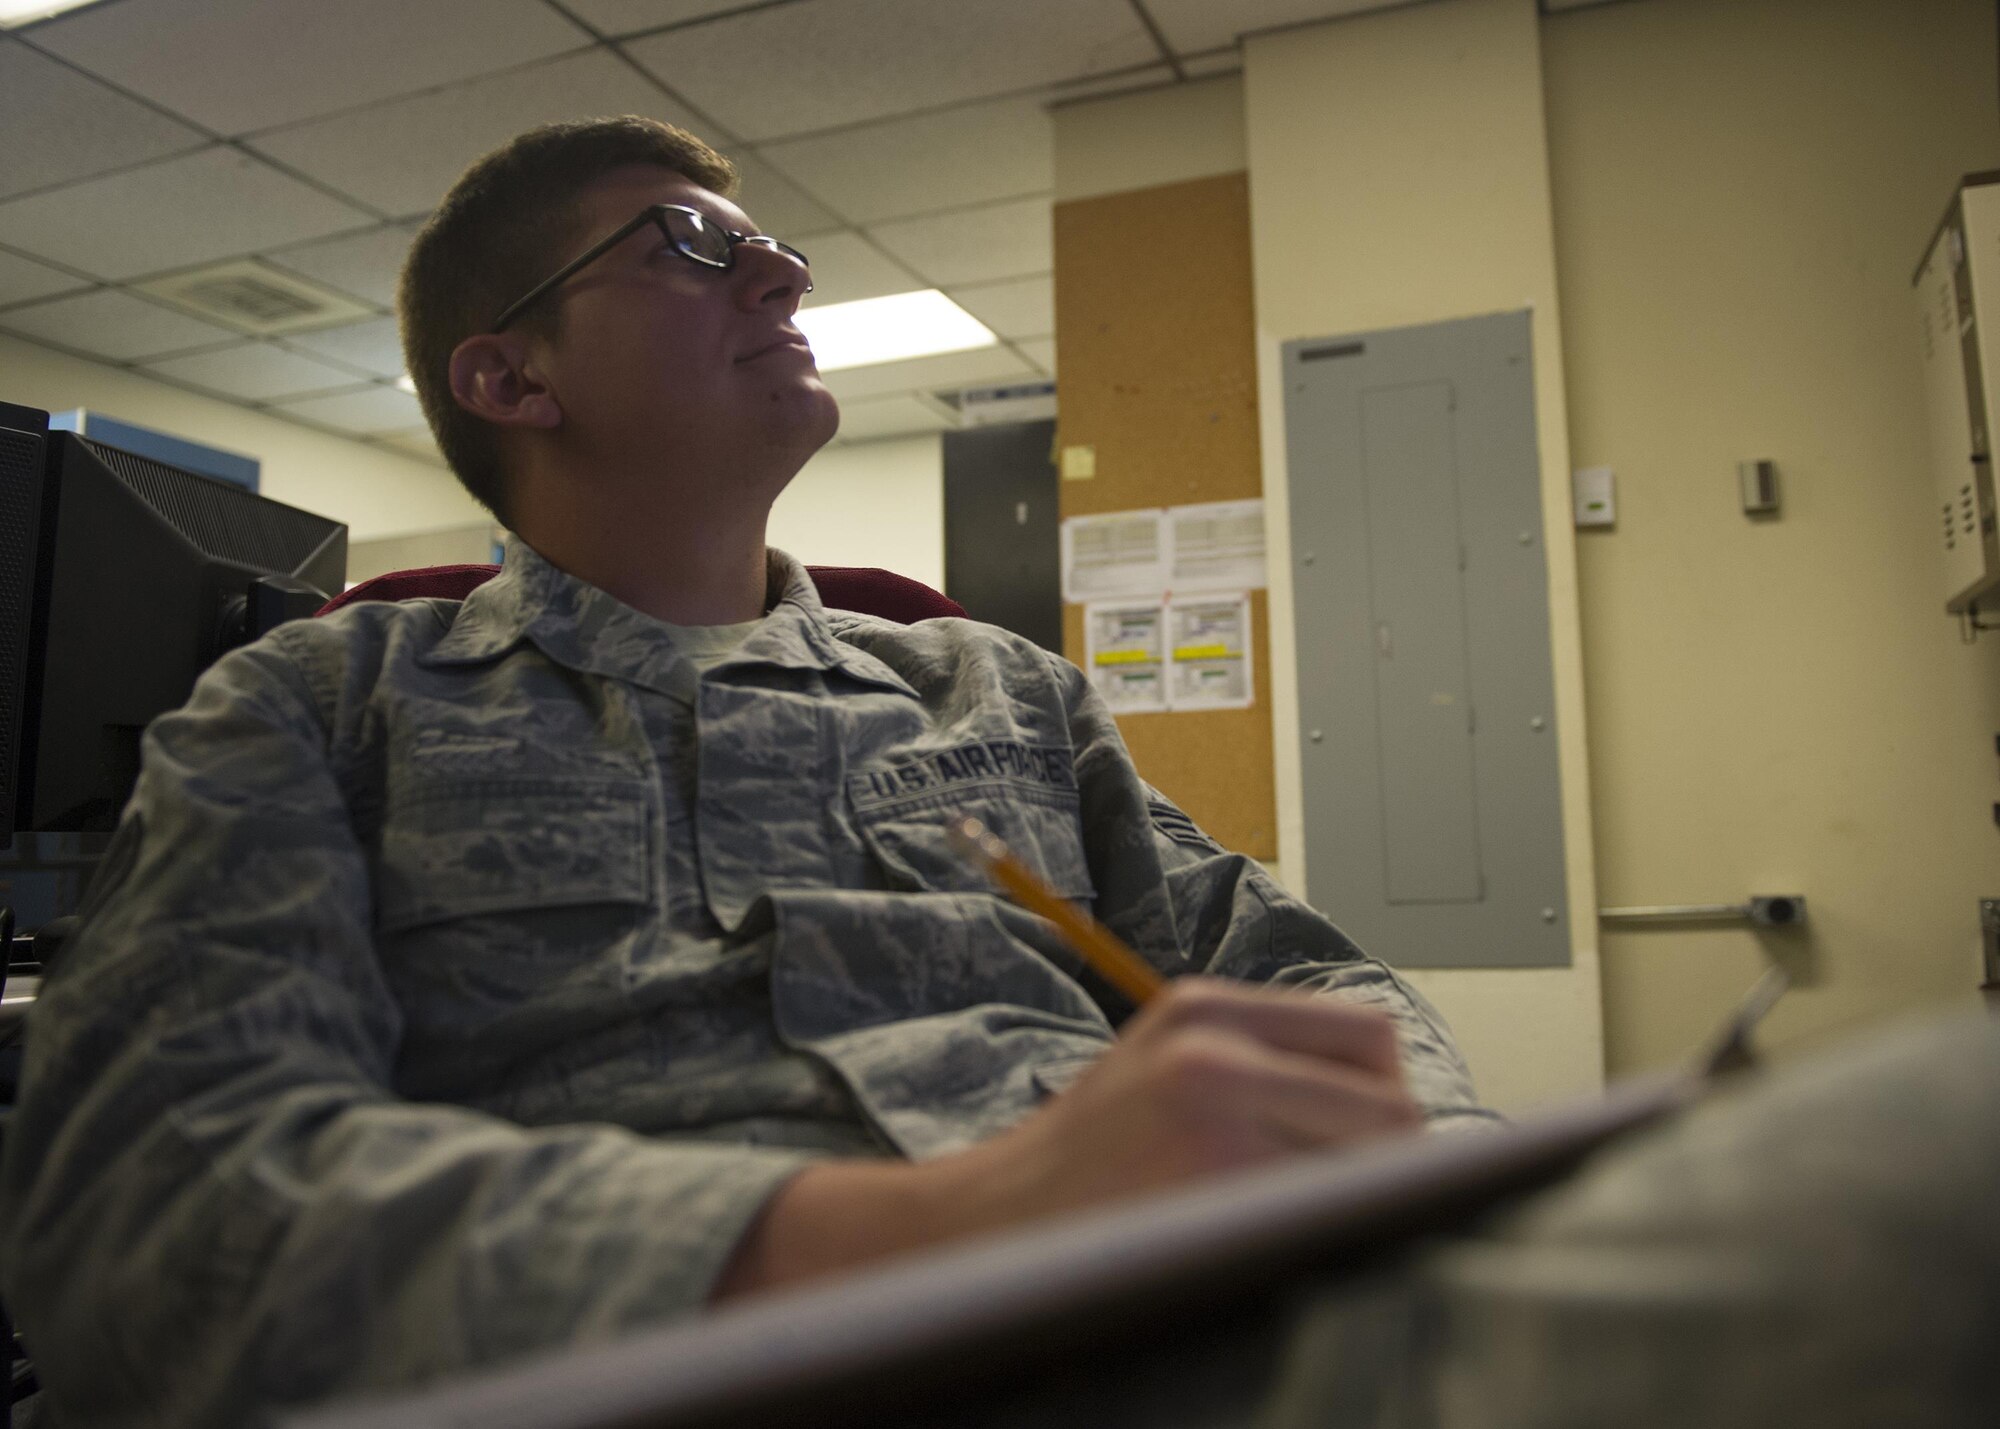 Senior Airman Christopher, a member of the National Air and Space Intelligence Center, tallies hits from pre-1980’s surface to air missile systems during a Red Flag exercise Thursday, Aug. 20, 2015 at Nellis Air Force Base, Nev. NASIC provides real-time documentation to help train both U.S. and allied nations’combat air forces. The exercise gives pilots the experience of multiple, intensive air combat sorties in the safety of a training environment. (U.S. Air Force photo illustration by Senior Airman Justyn Freeman)